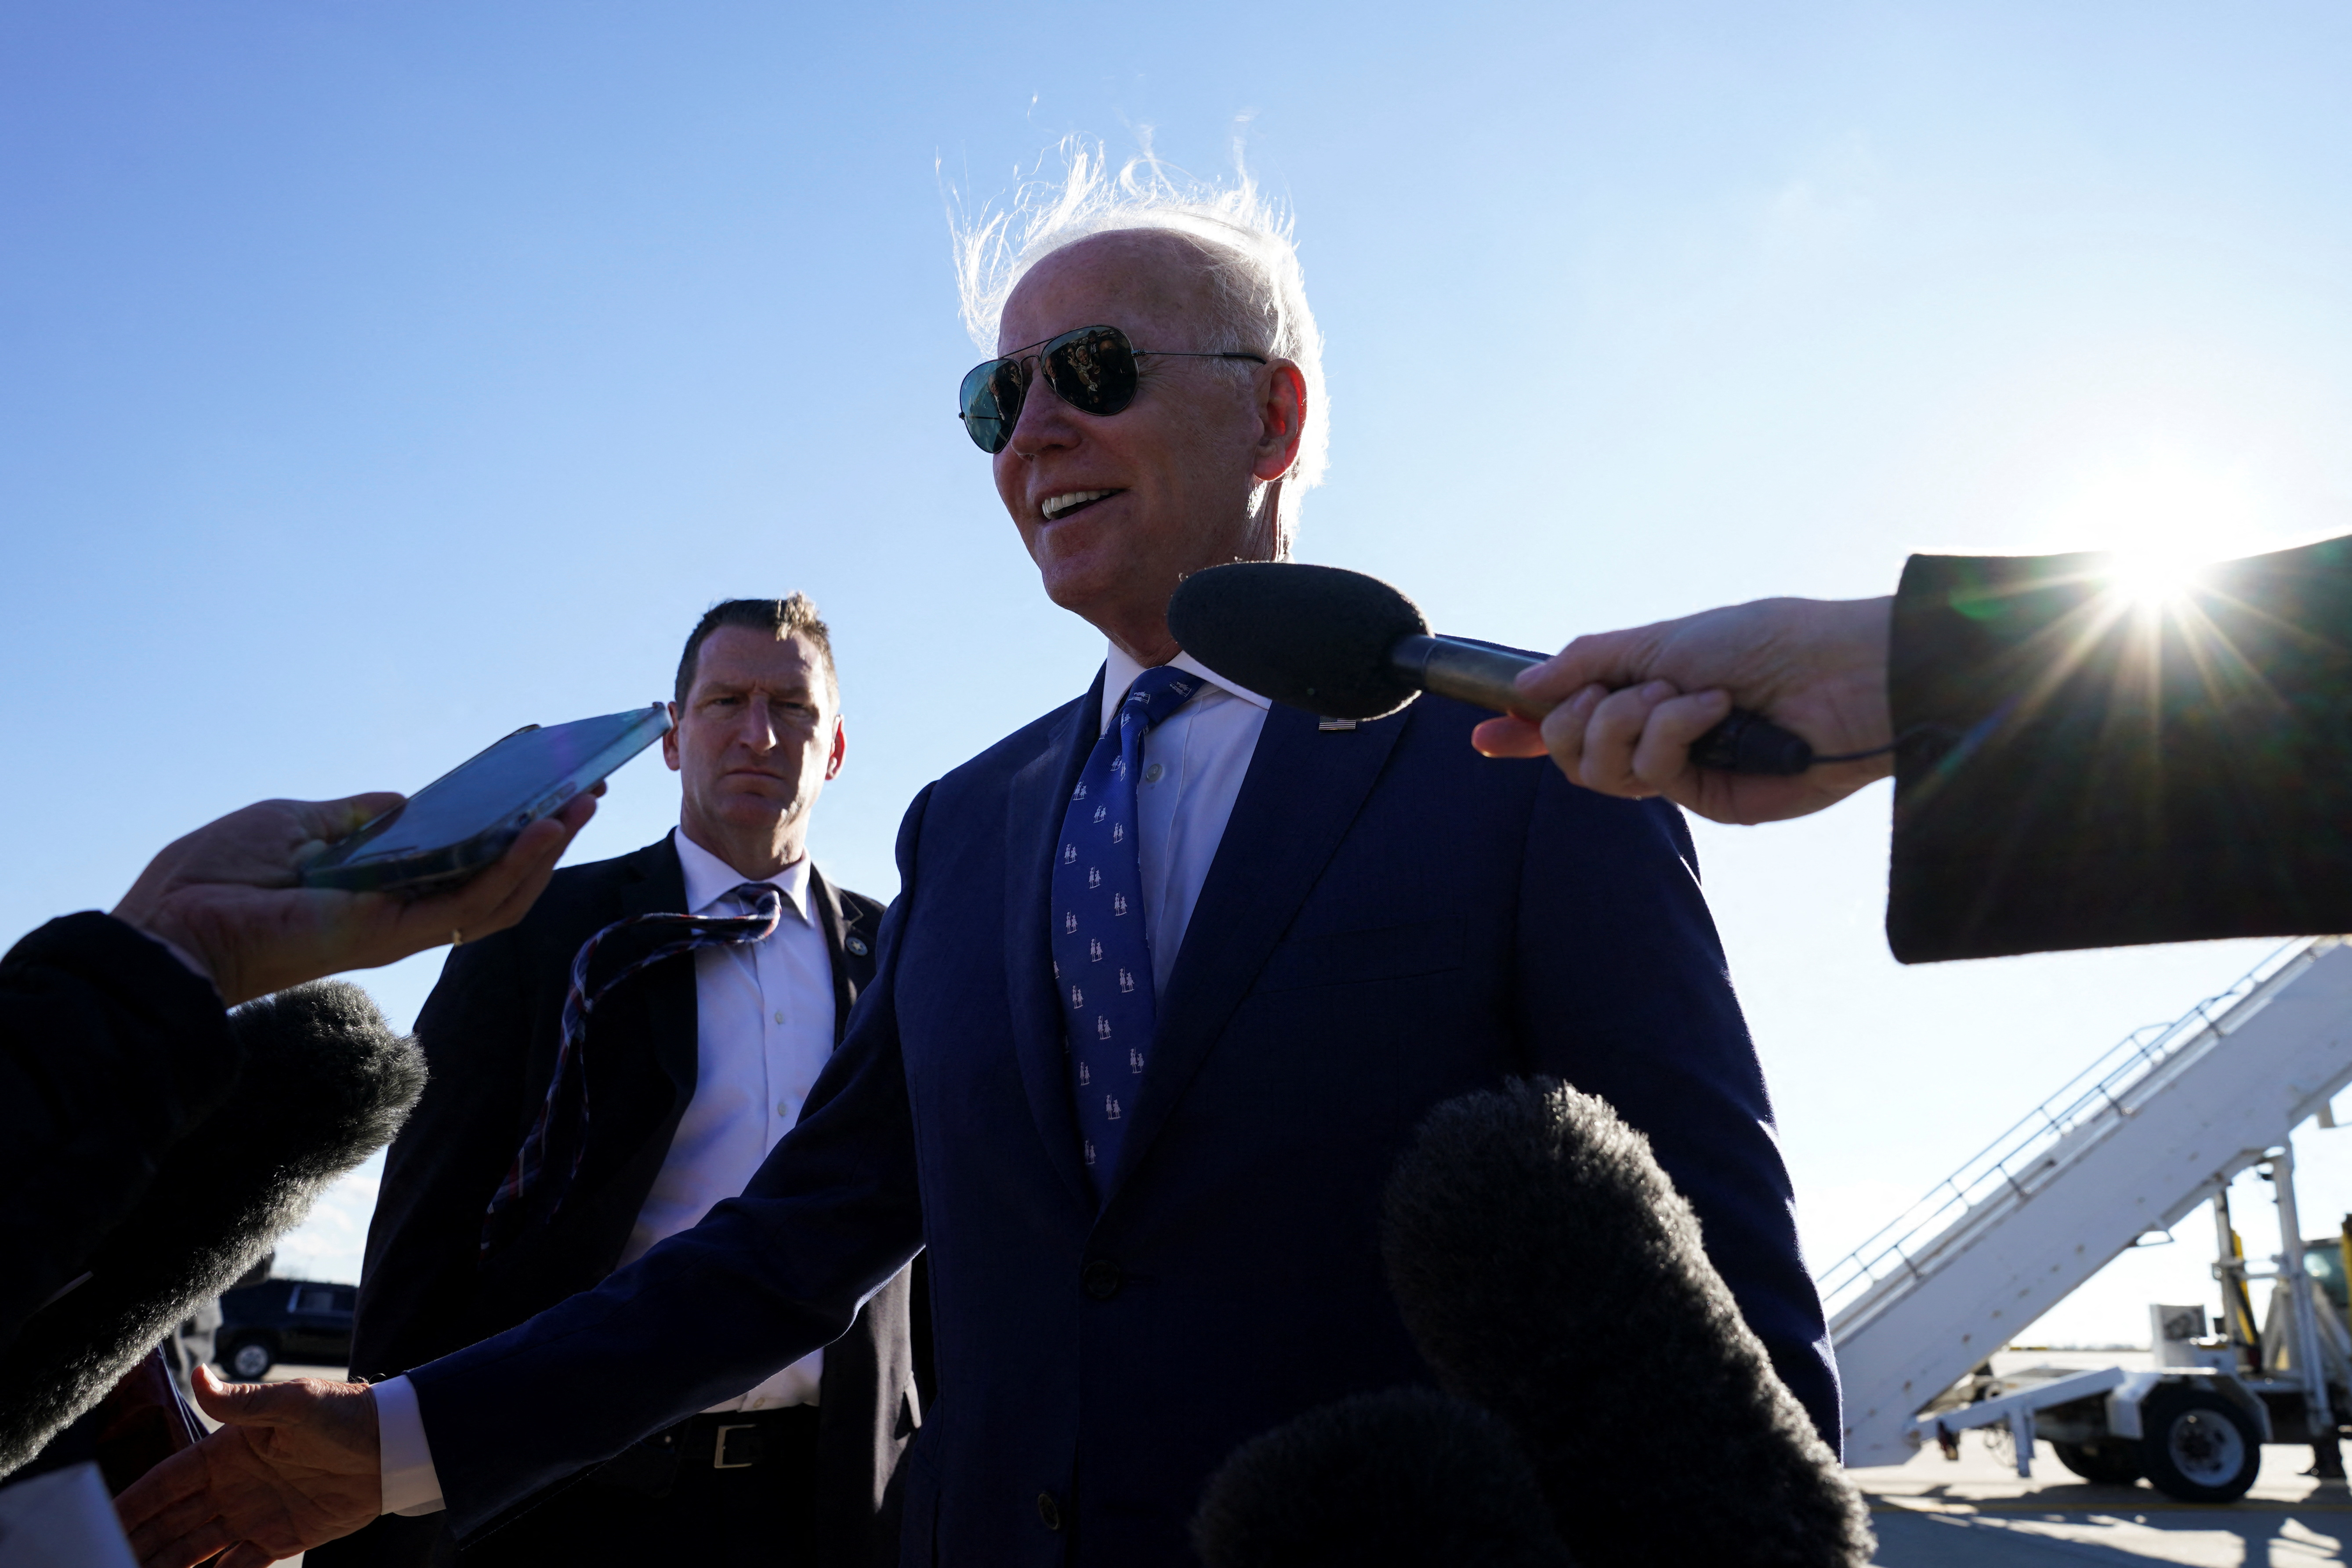 U.S. President Joe Biden speaks to members of the media, following an event touting economic and infrastructure spending plans, as he departs, at the Cincinnati/Northern Kentucky International Airport, in Hebron, Kentucky, U.S., January 4, 2023. REUTERS/Kevin Lamarque